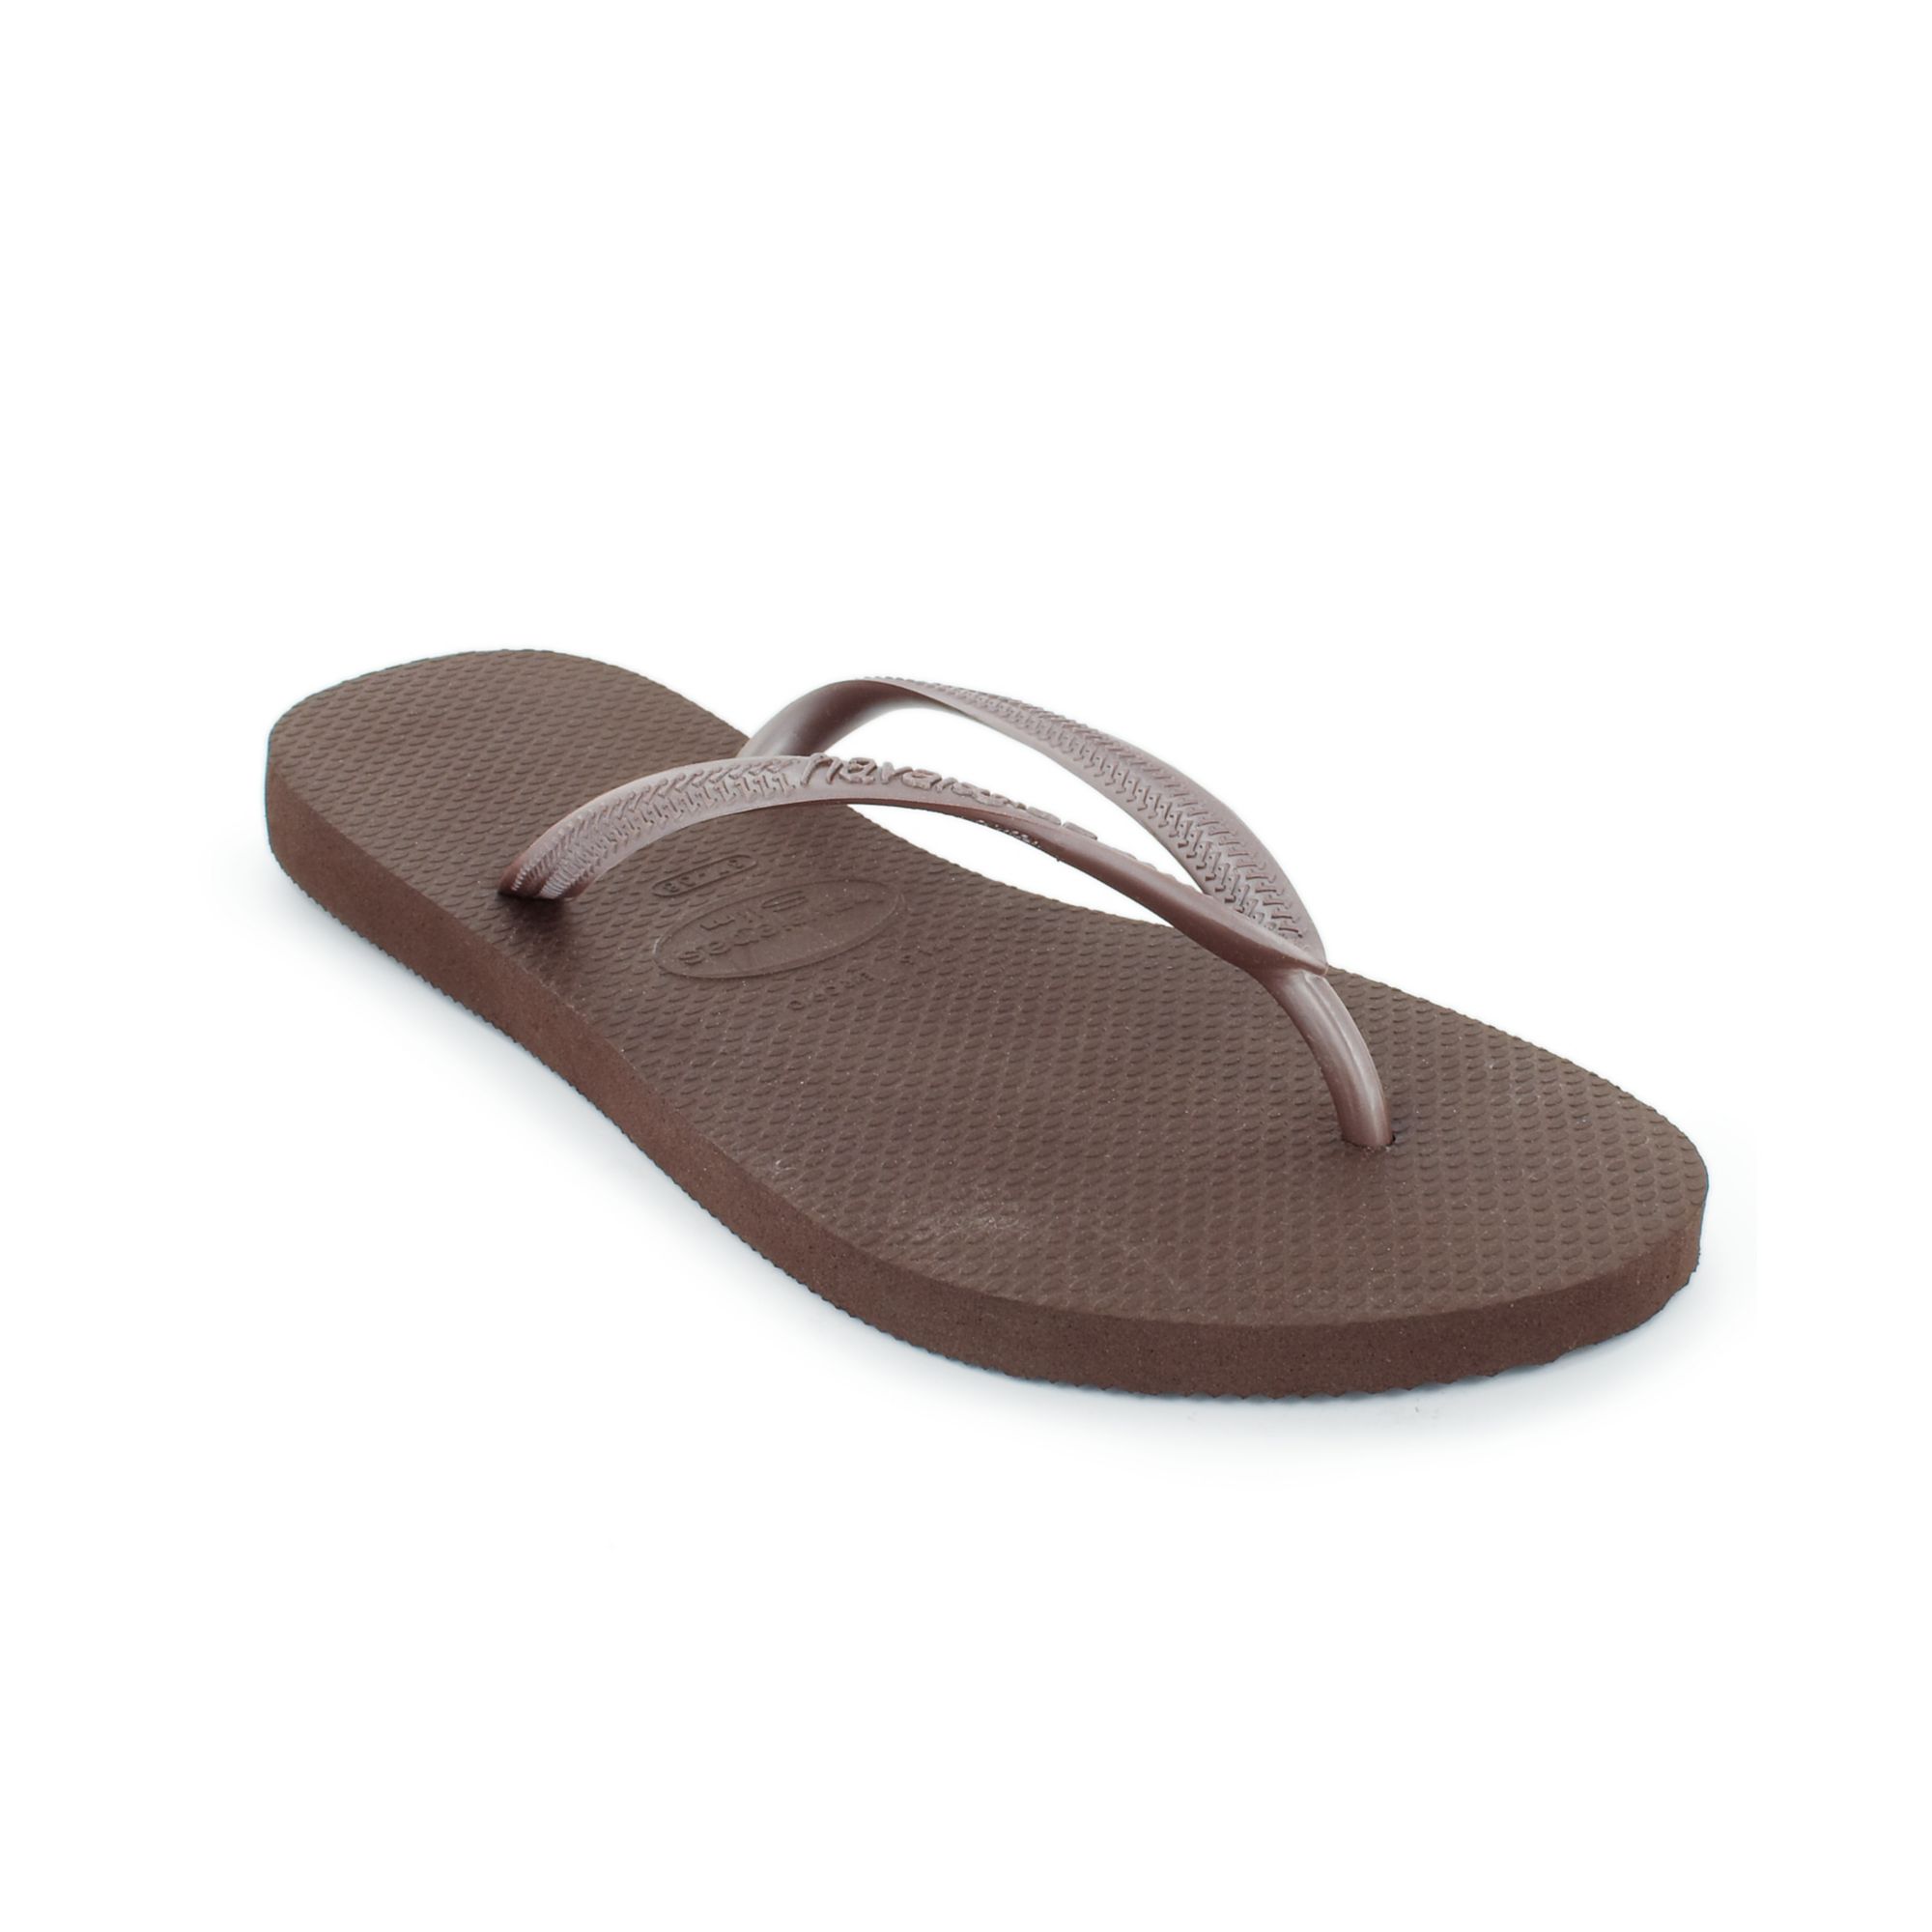 Womens Shoes Flats and flat shoes Sandals and flip-flops Havaianas Slim Flat Flip Flop 6.5 Dark Brown 